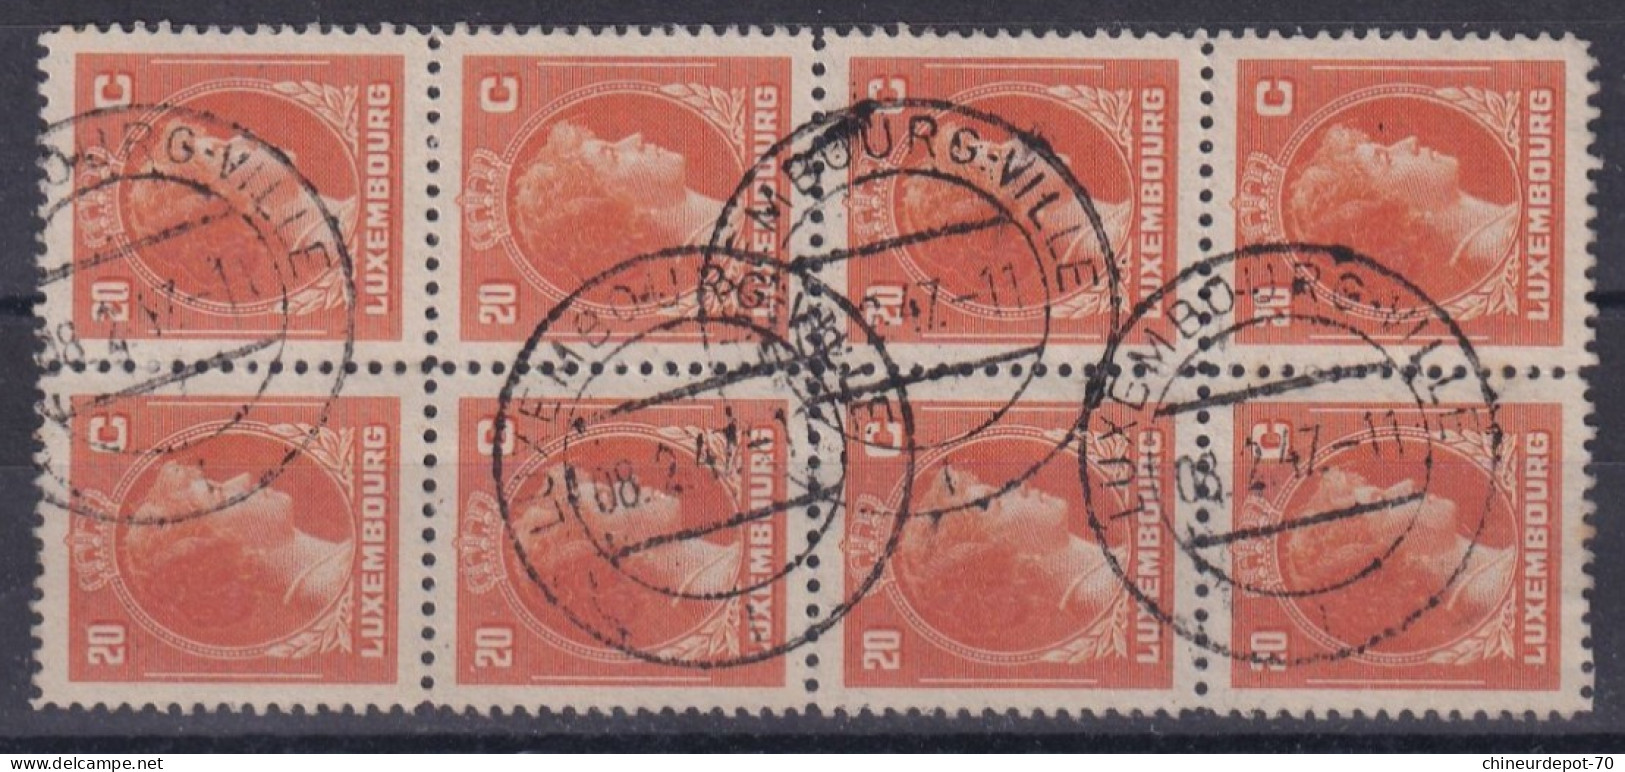 Luxembourg Charlotte - Used Stamps